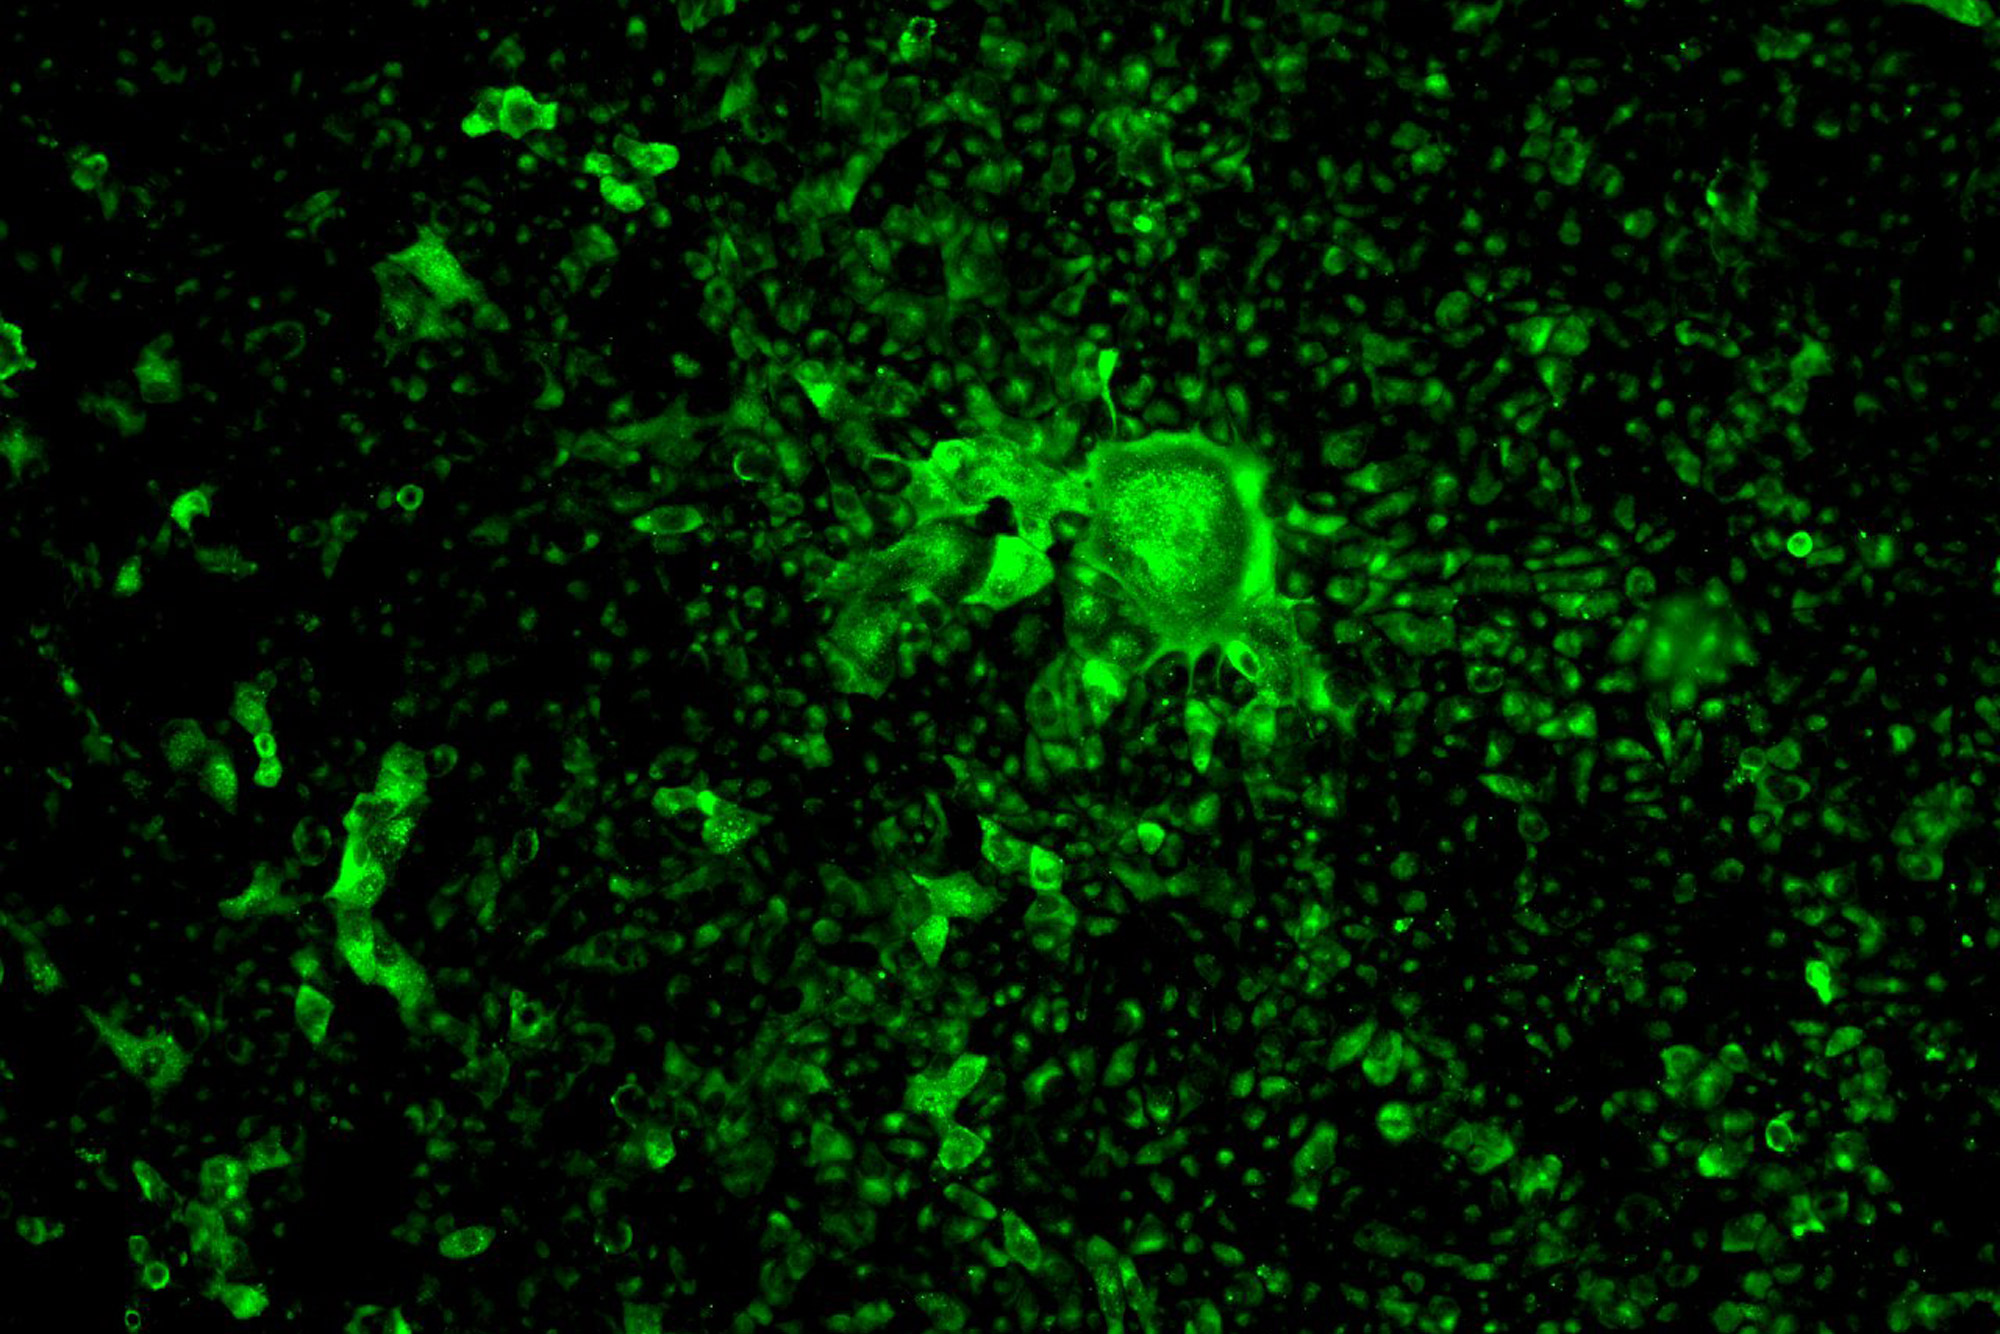 A photo of cells infected with the novel coronavirus glowing green under blue light